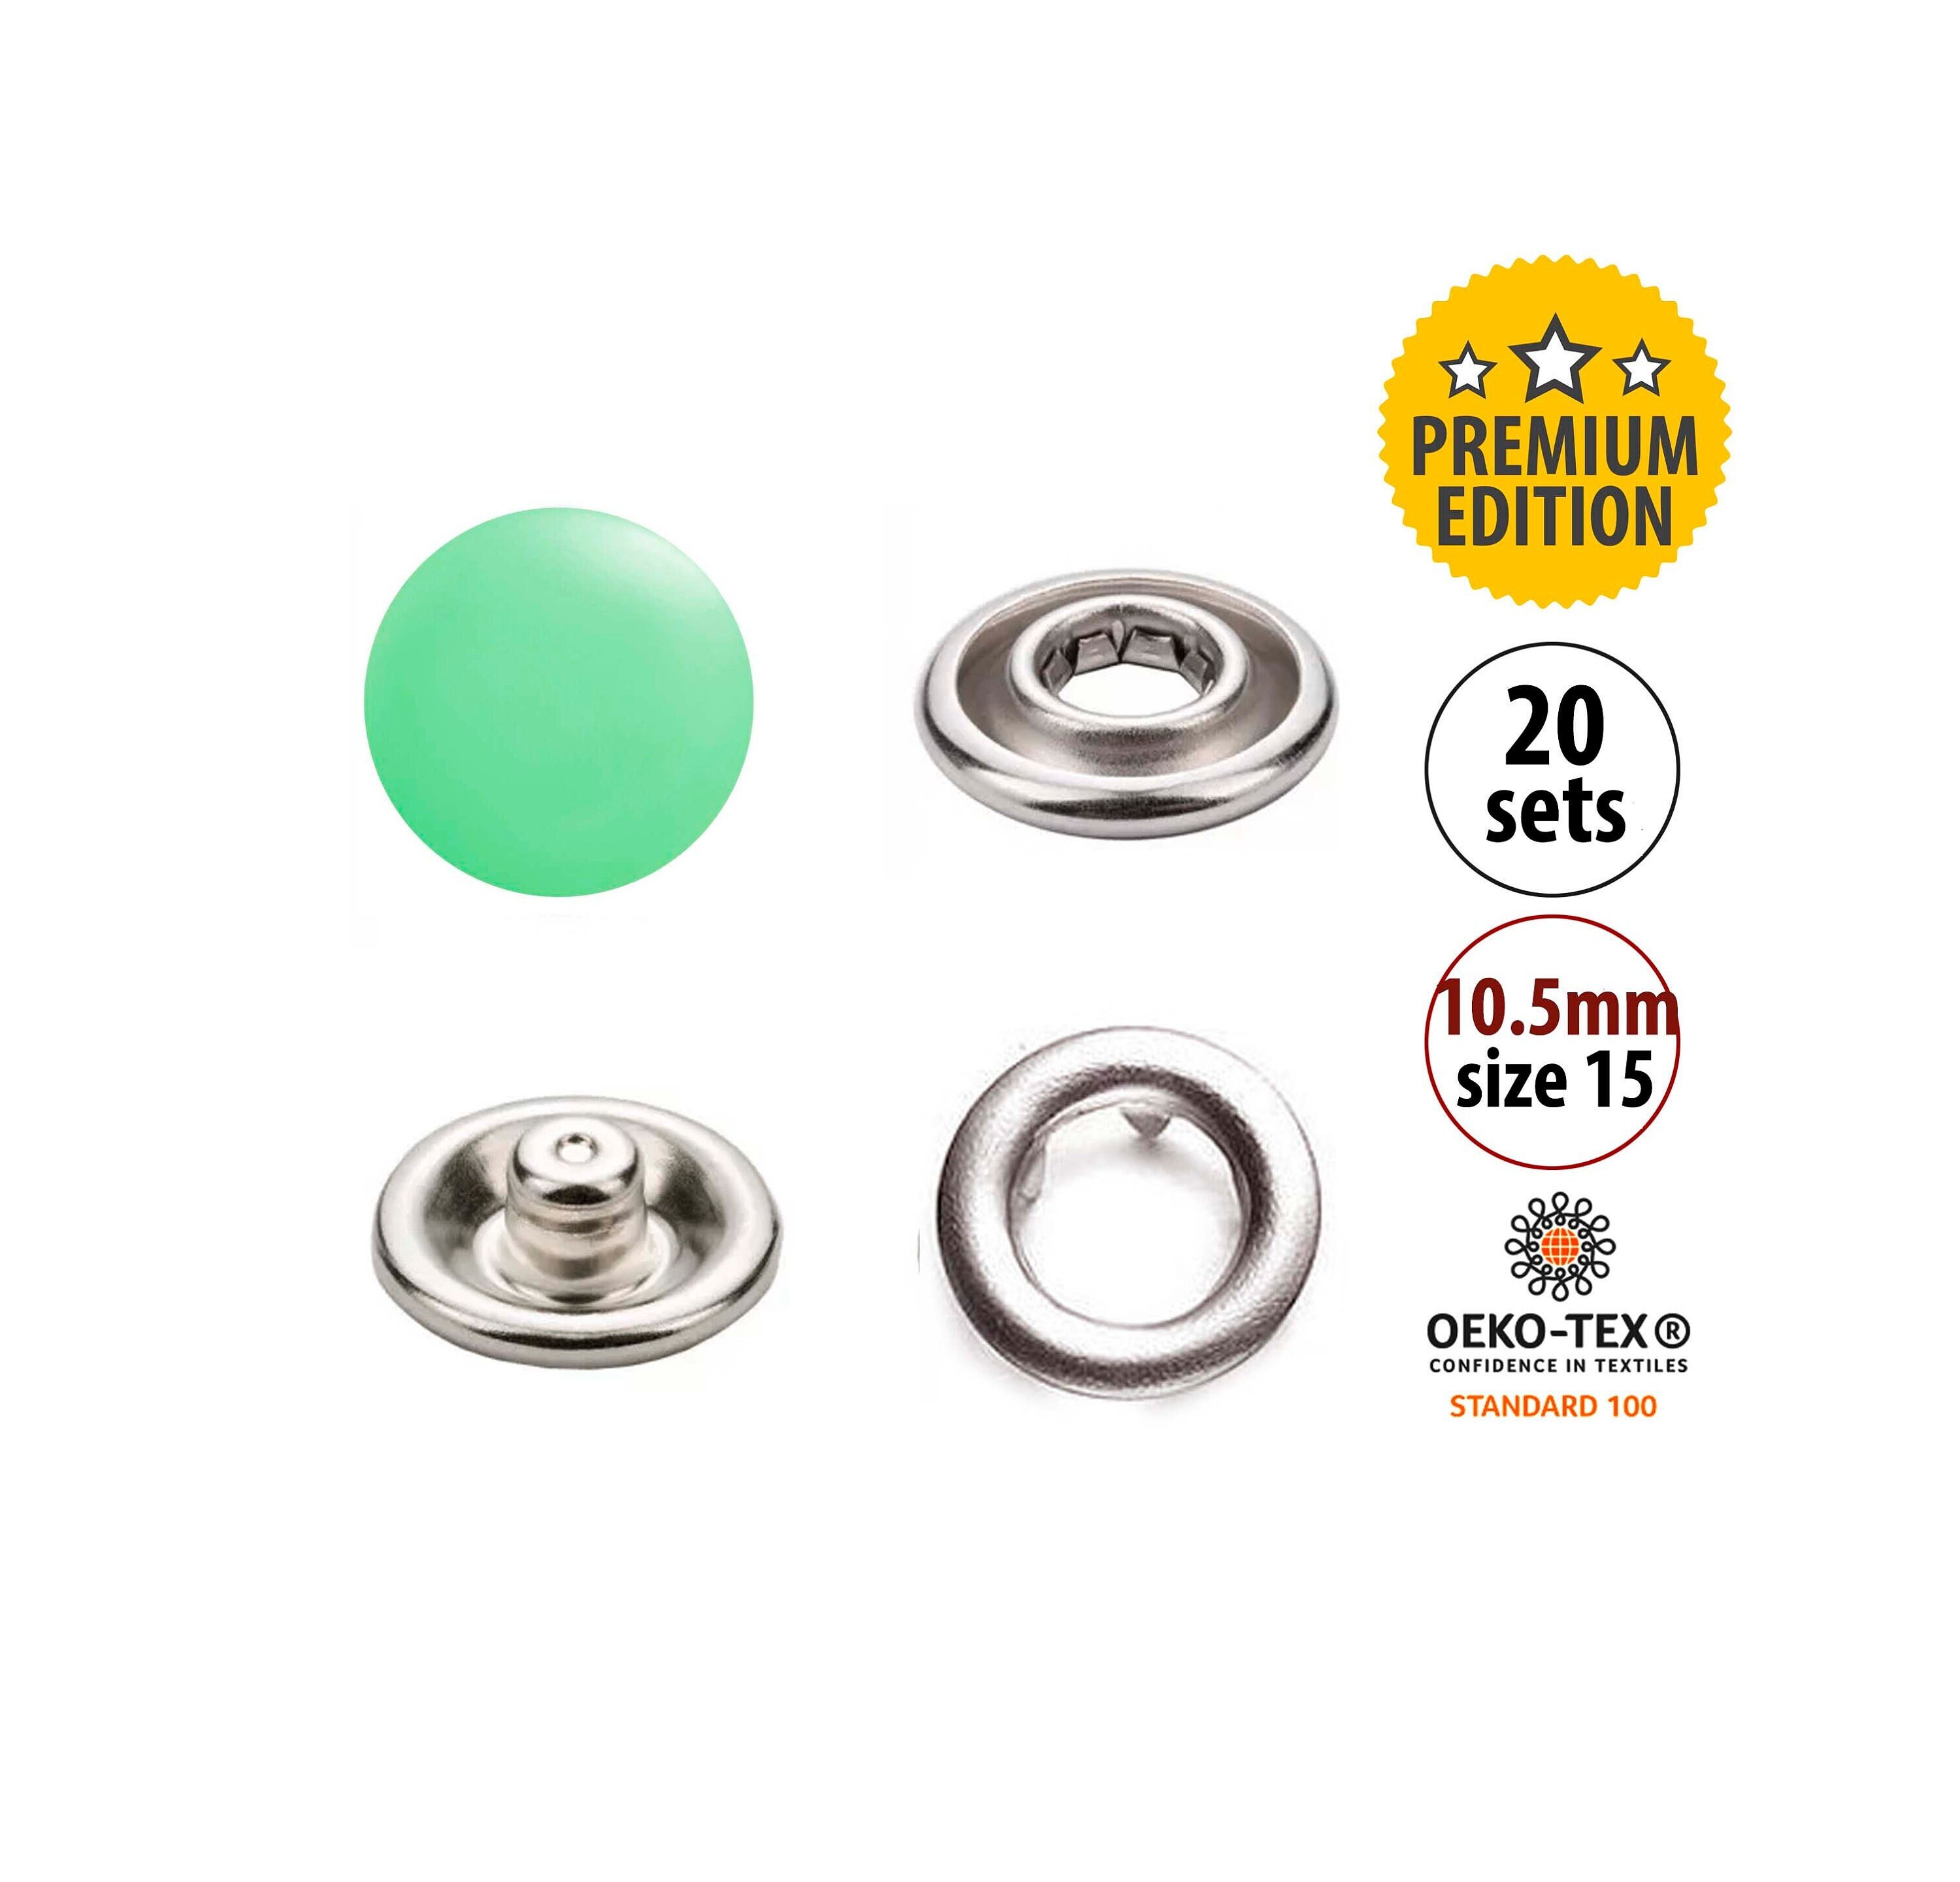 KAM Snaps Kit, Snap Button Tool for KAM and Metal Spring Fasteners